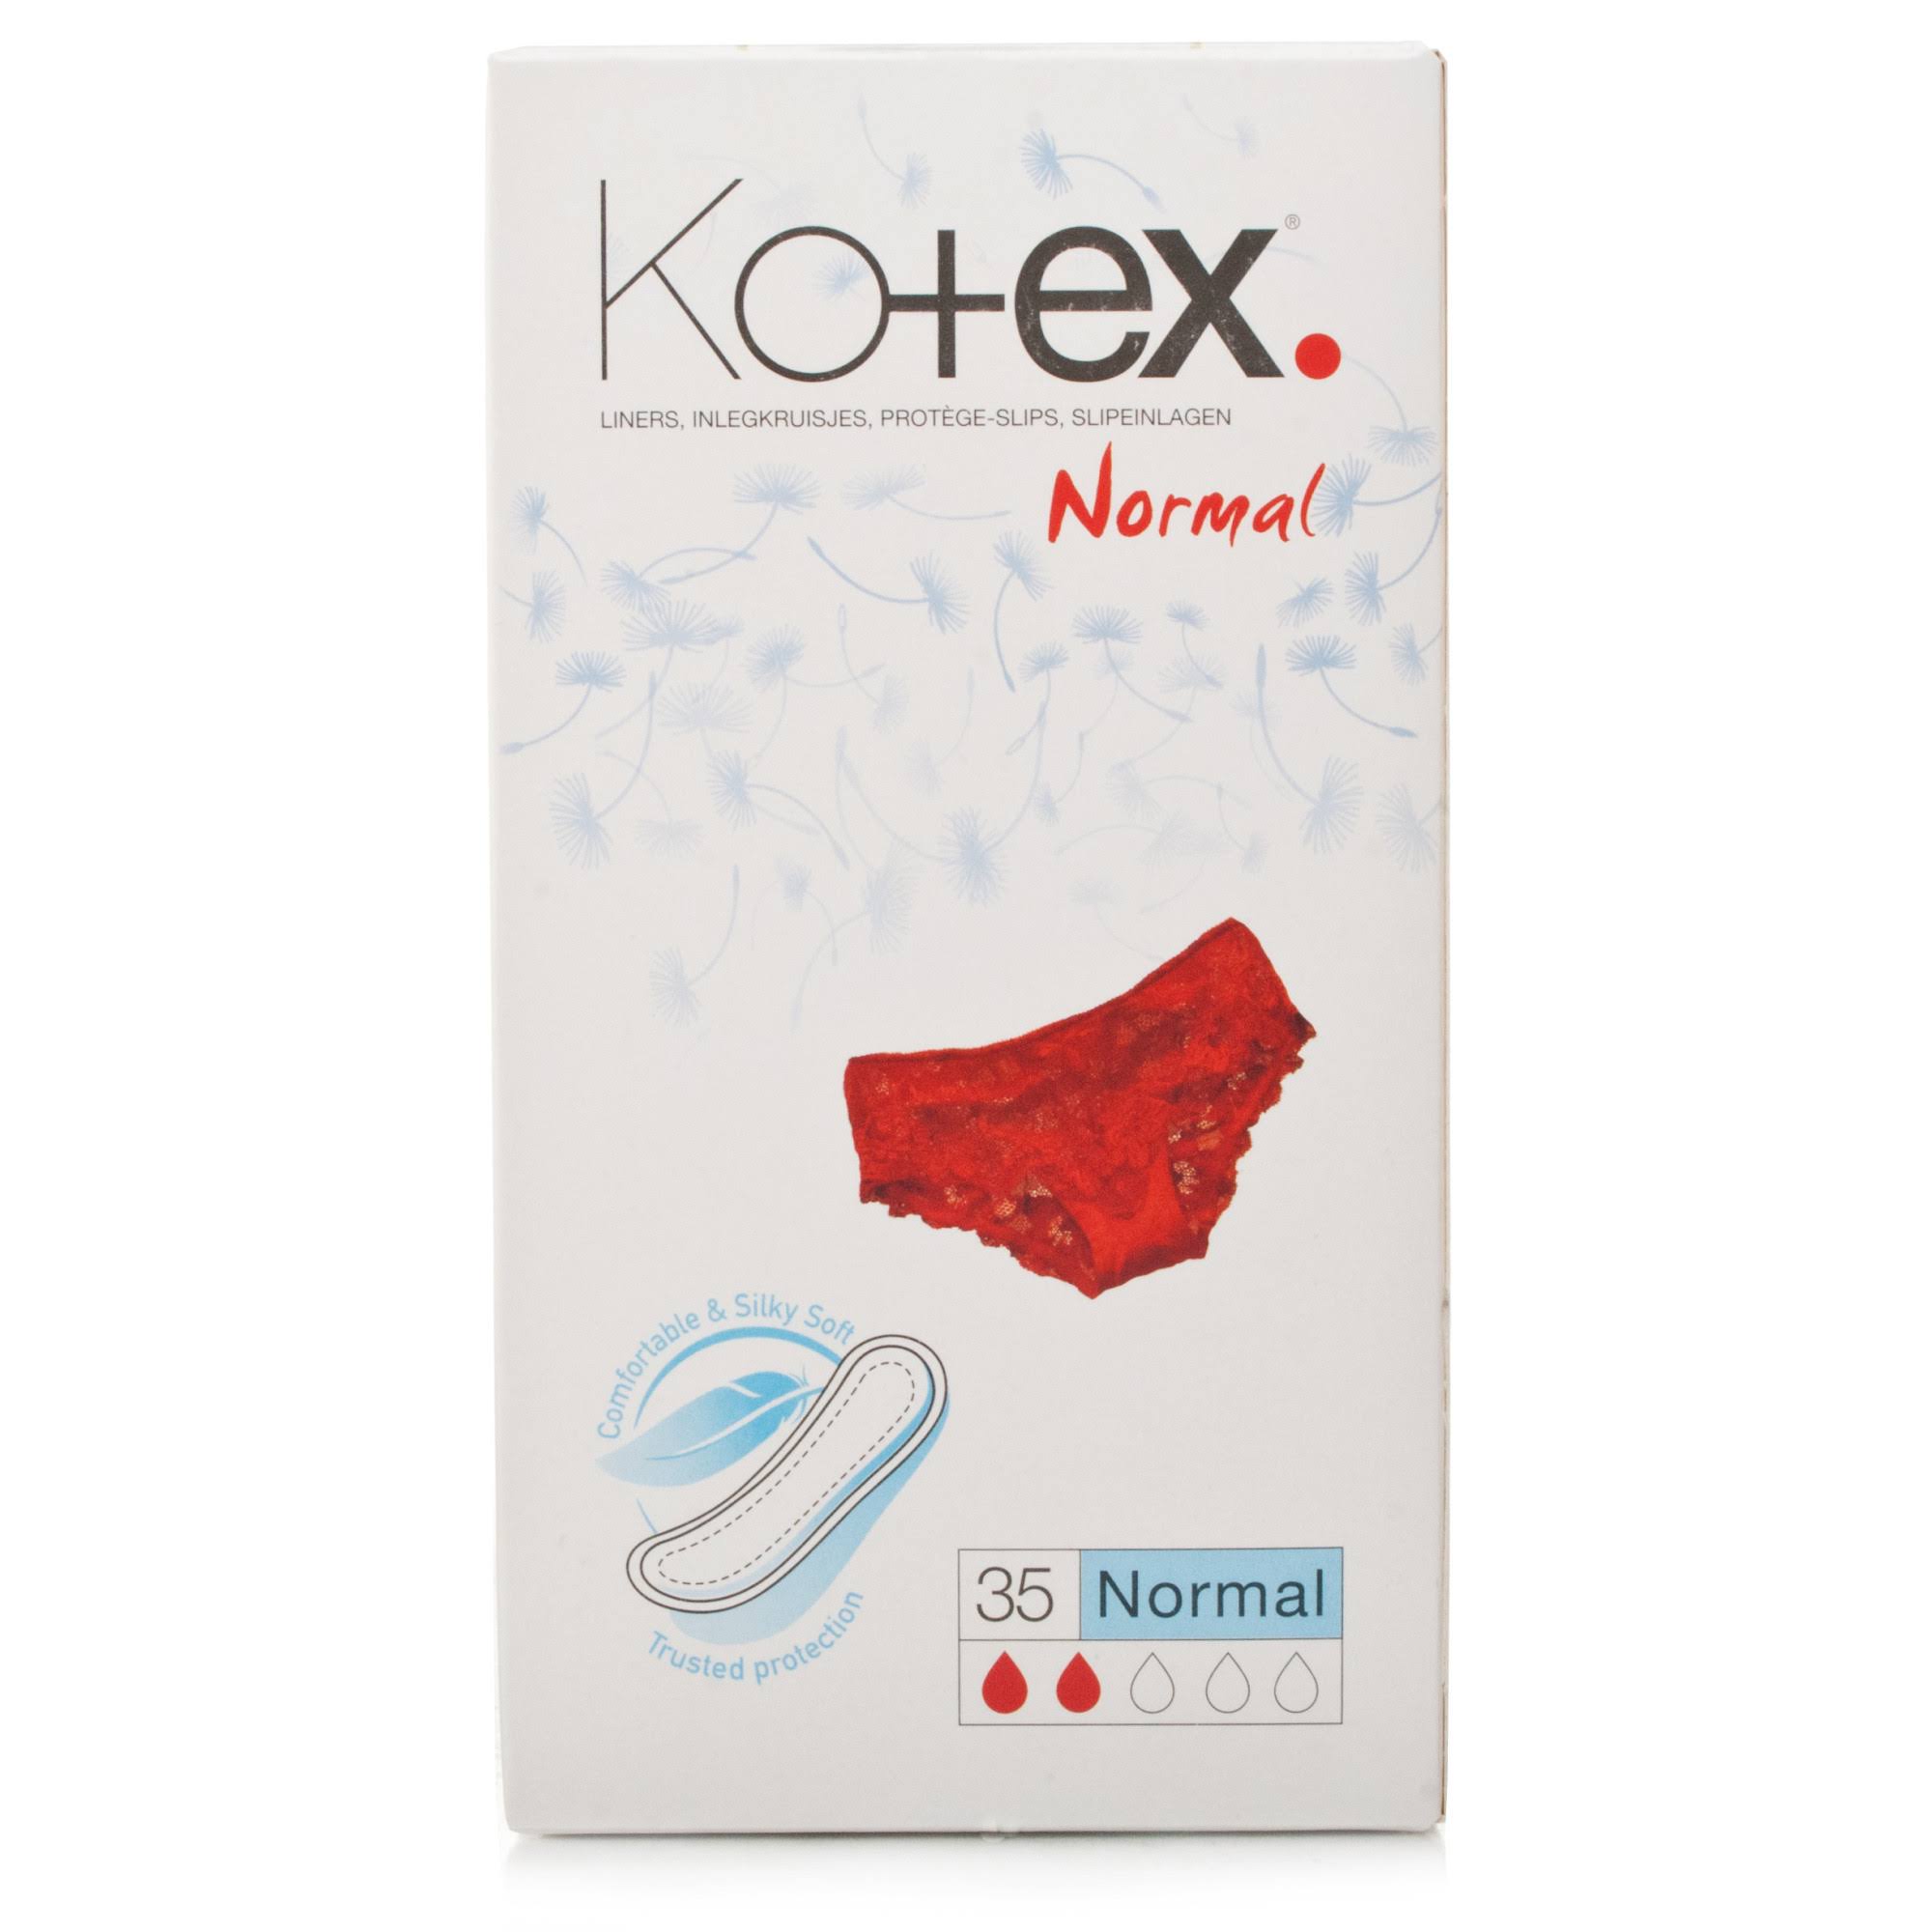 Kotex Liners - Normal, 35 Liners